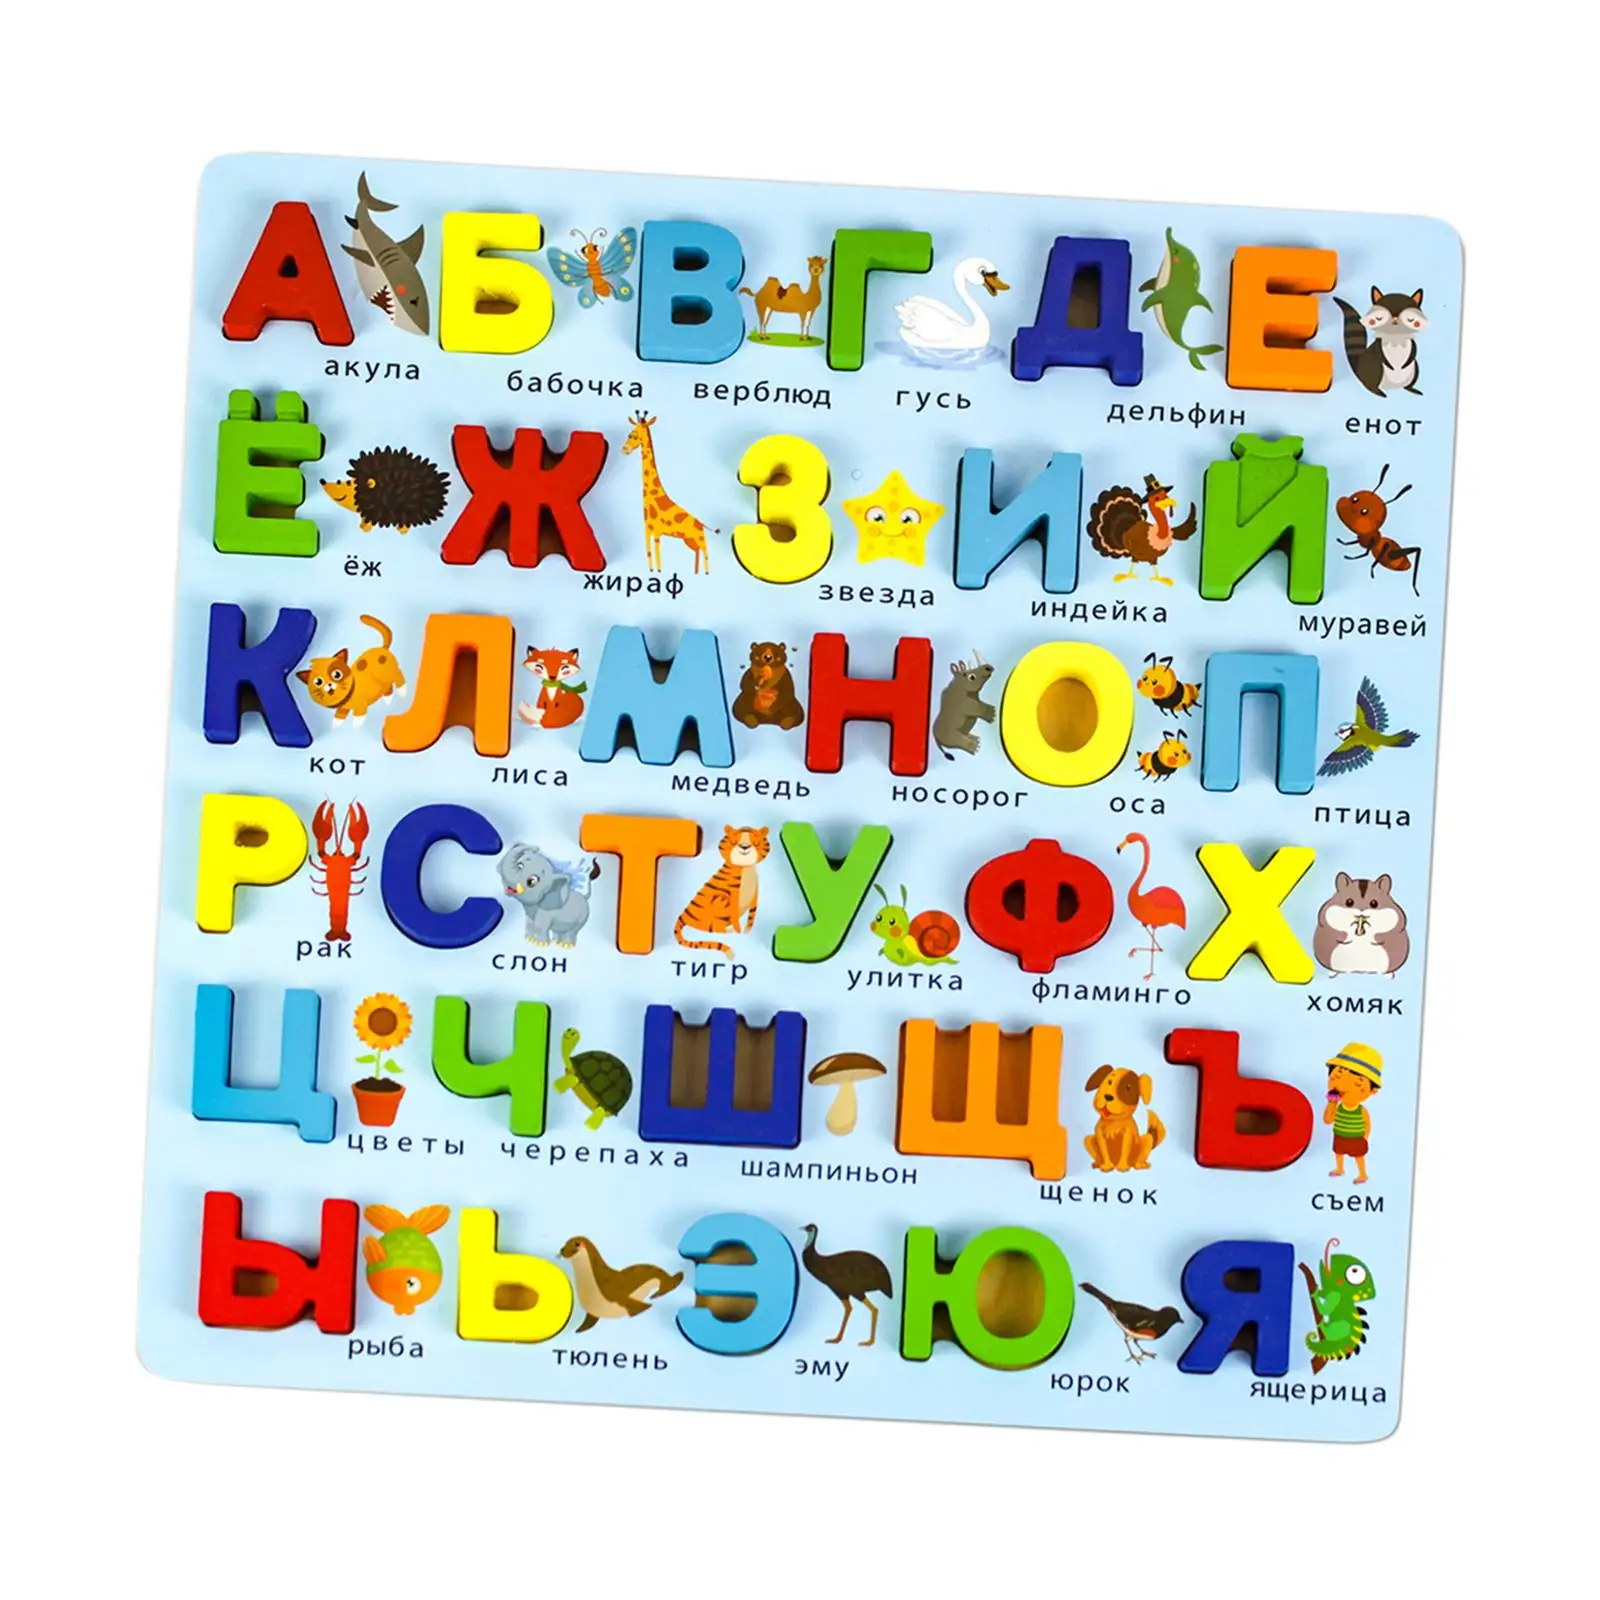 Wooden Puzzles Set Russian Alphabet Teaching Aids Preschool Learning Educational Educational Toys Learning Puzzles Board for Kid